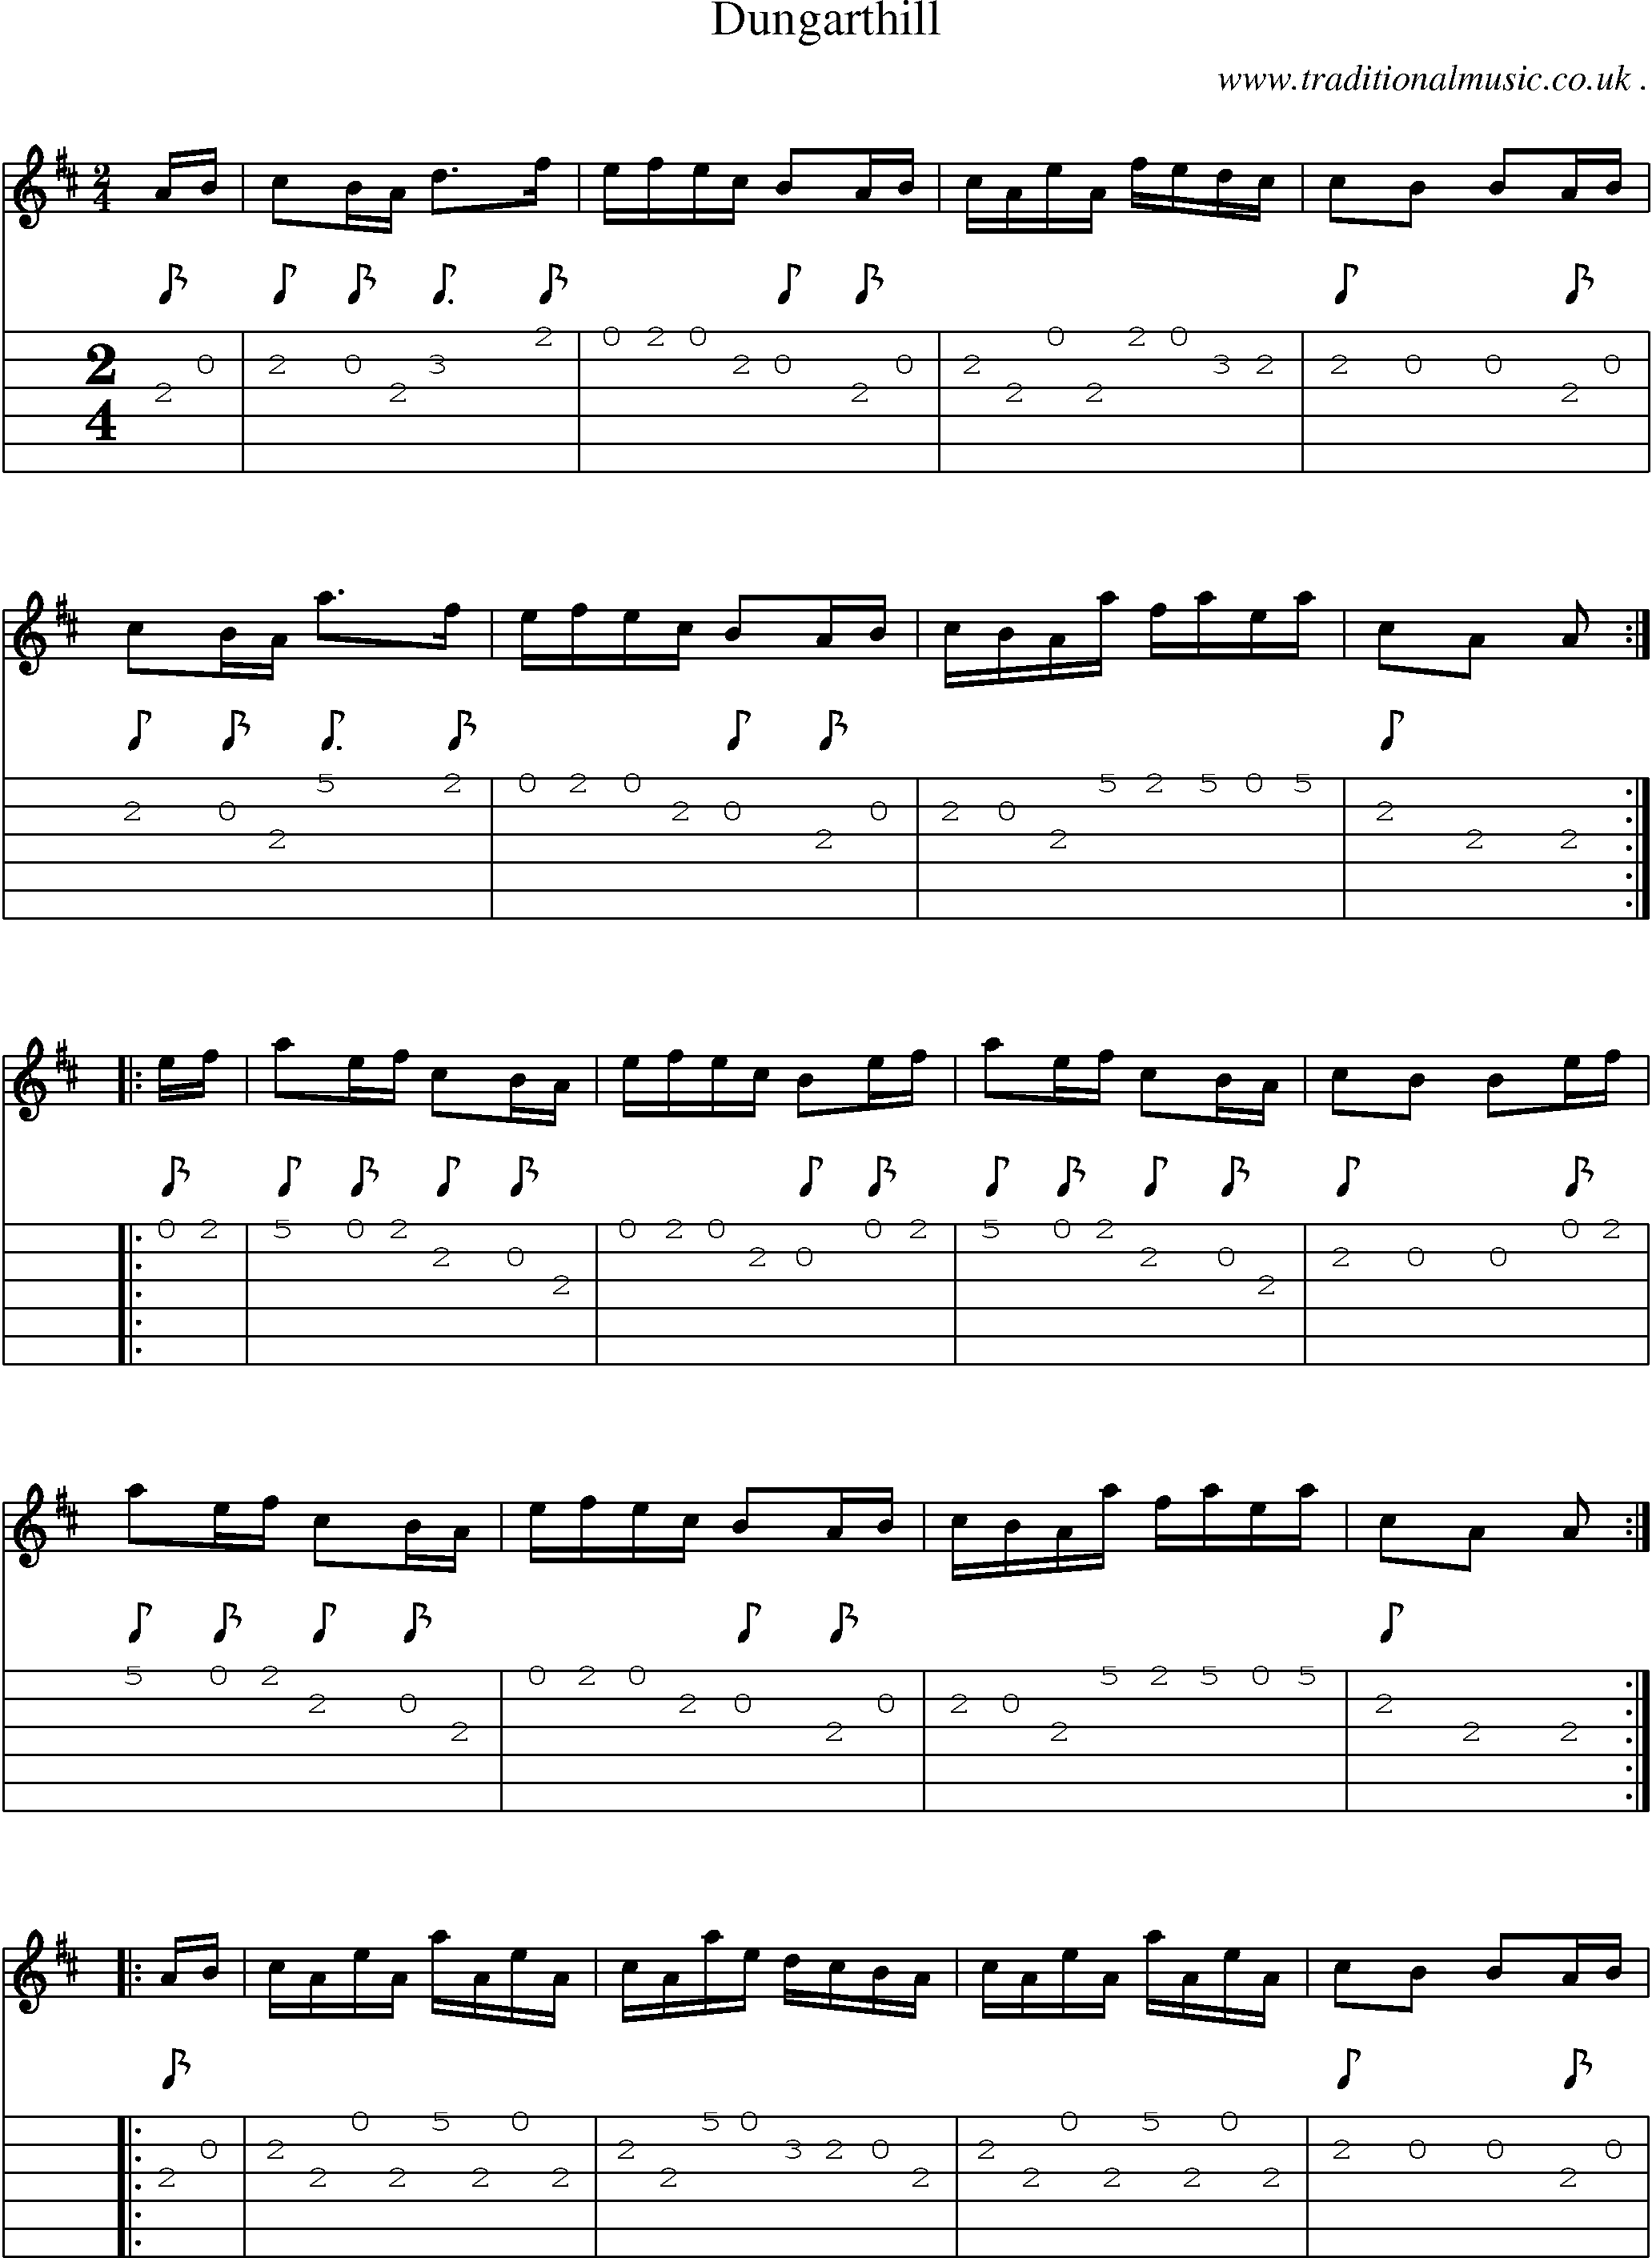 Sheet-Music and Guitar Tabs for Dungarthill